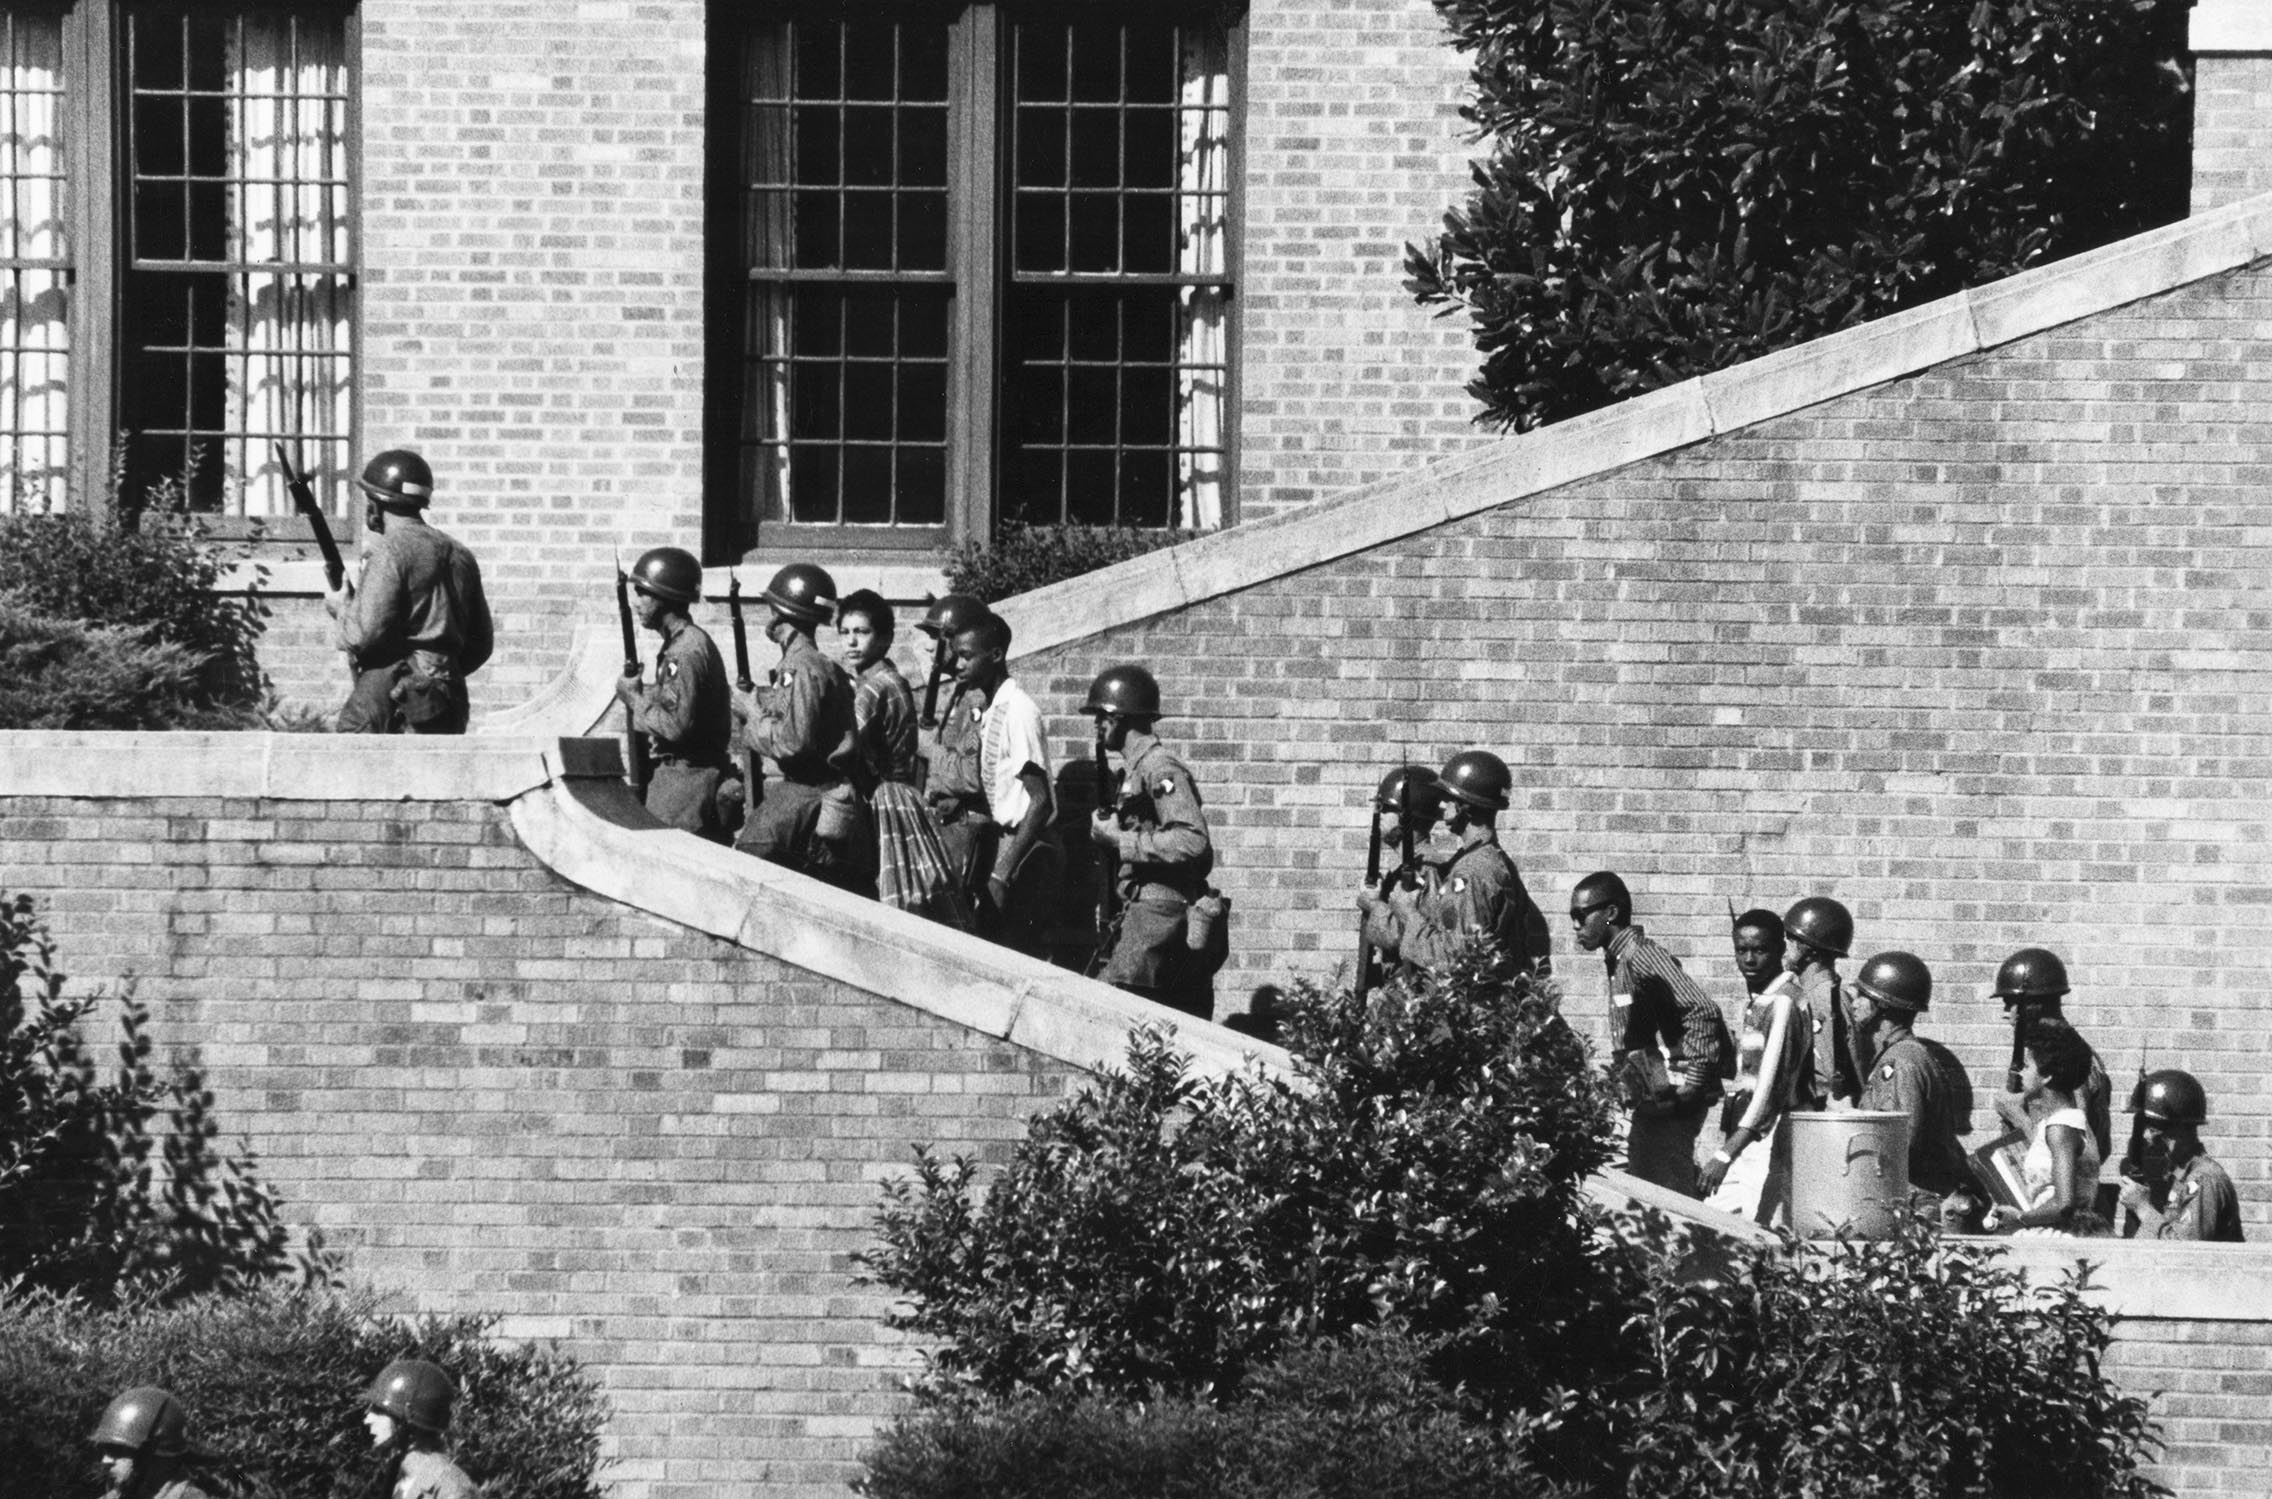 Little Rock Nine Escorted by 101st Airborne Division